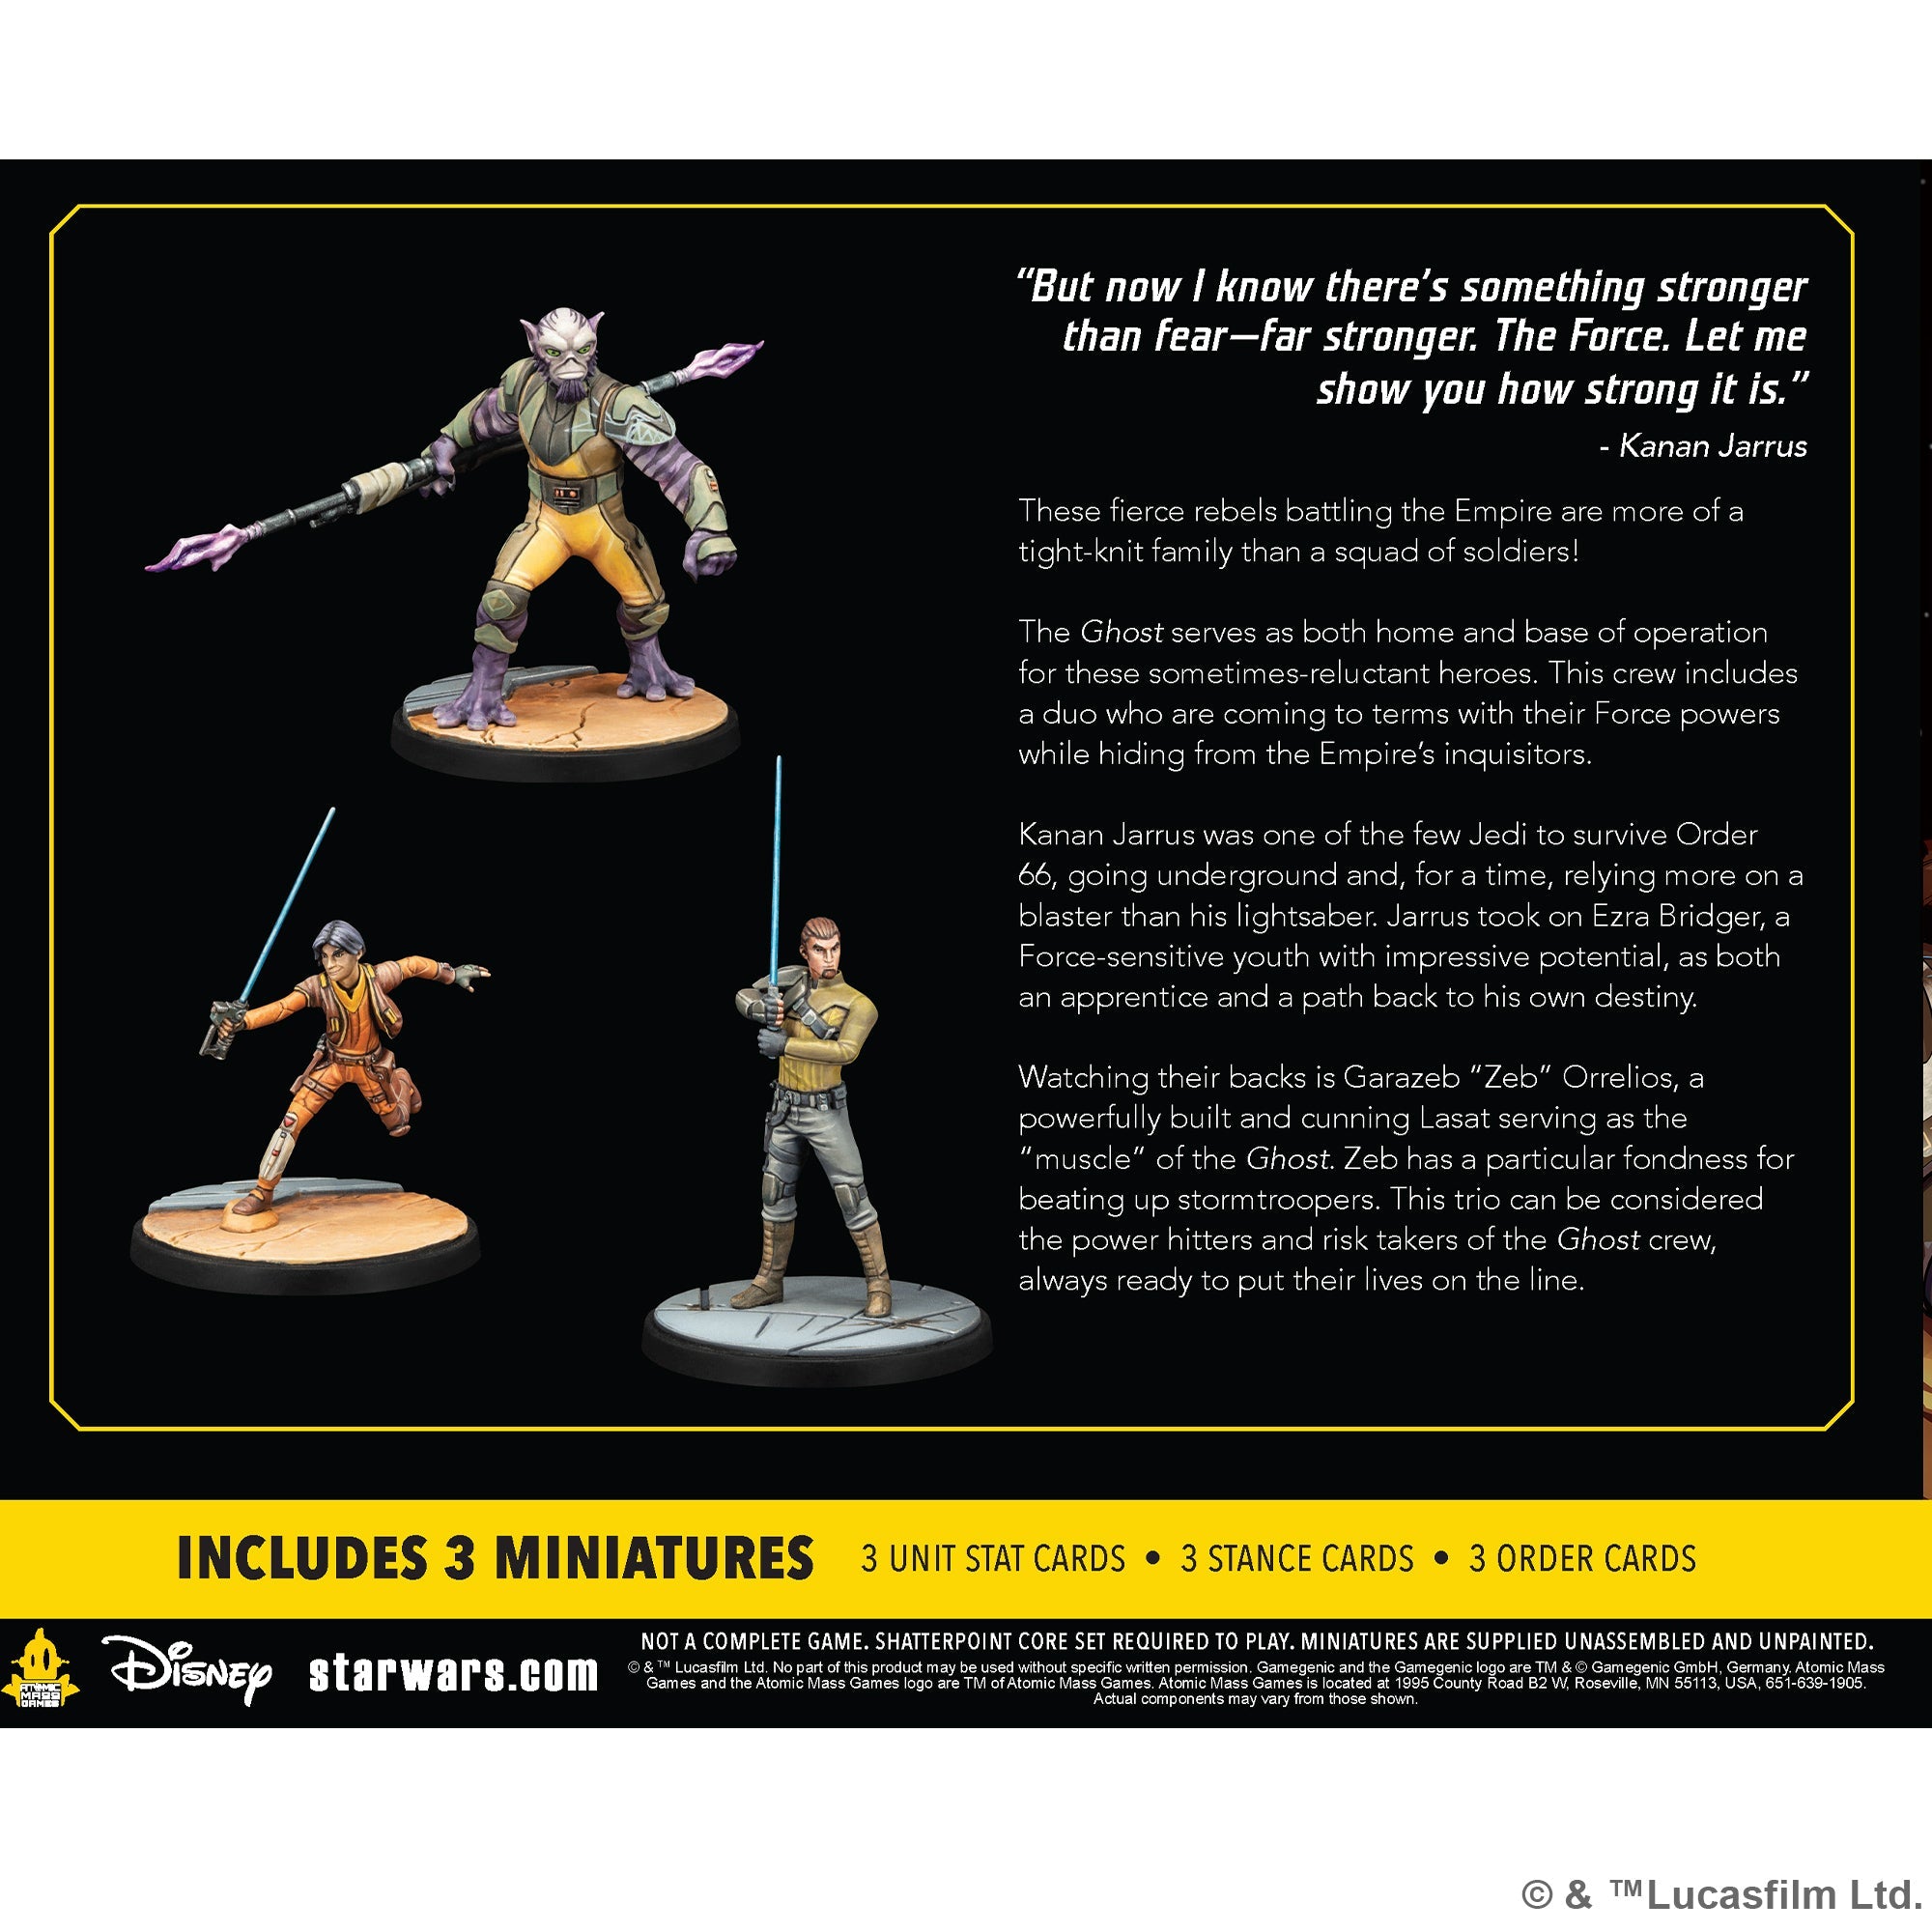 Star Wars Shatterpoint: Stronger Than Fear, Kanan Jarrus Squad Pack [July 5]